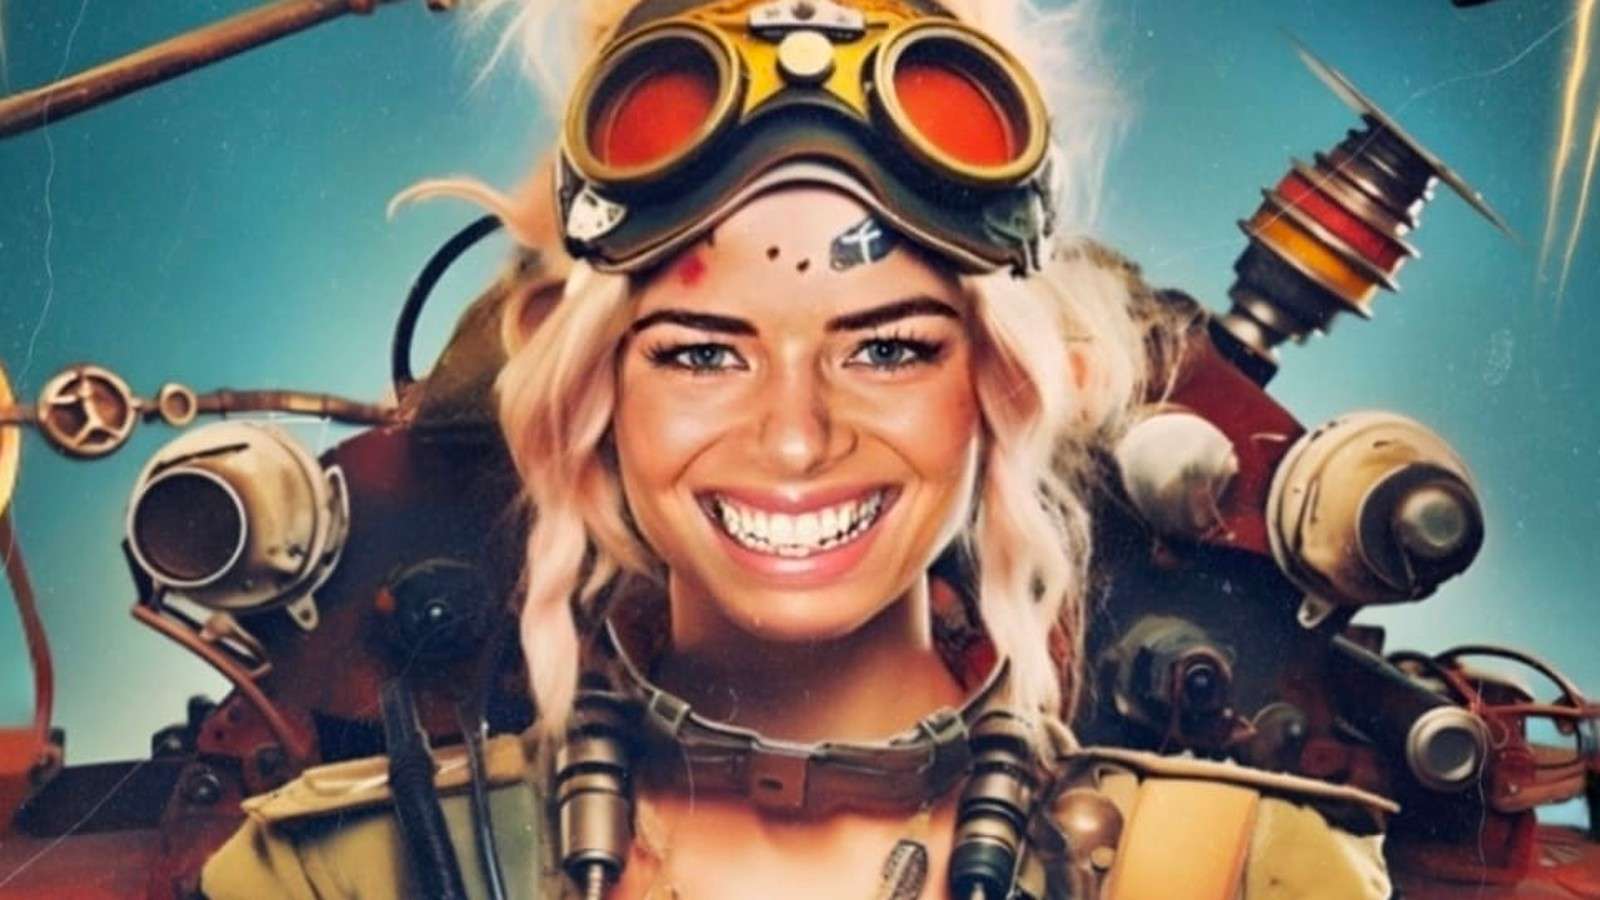 The fake poster for the Tank Girl remake